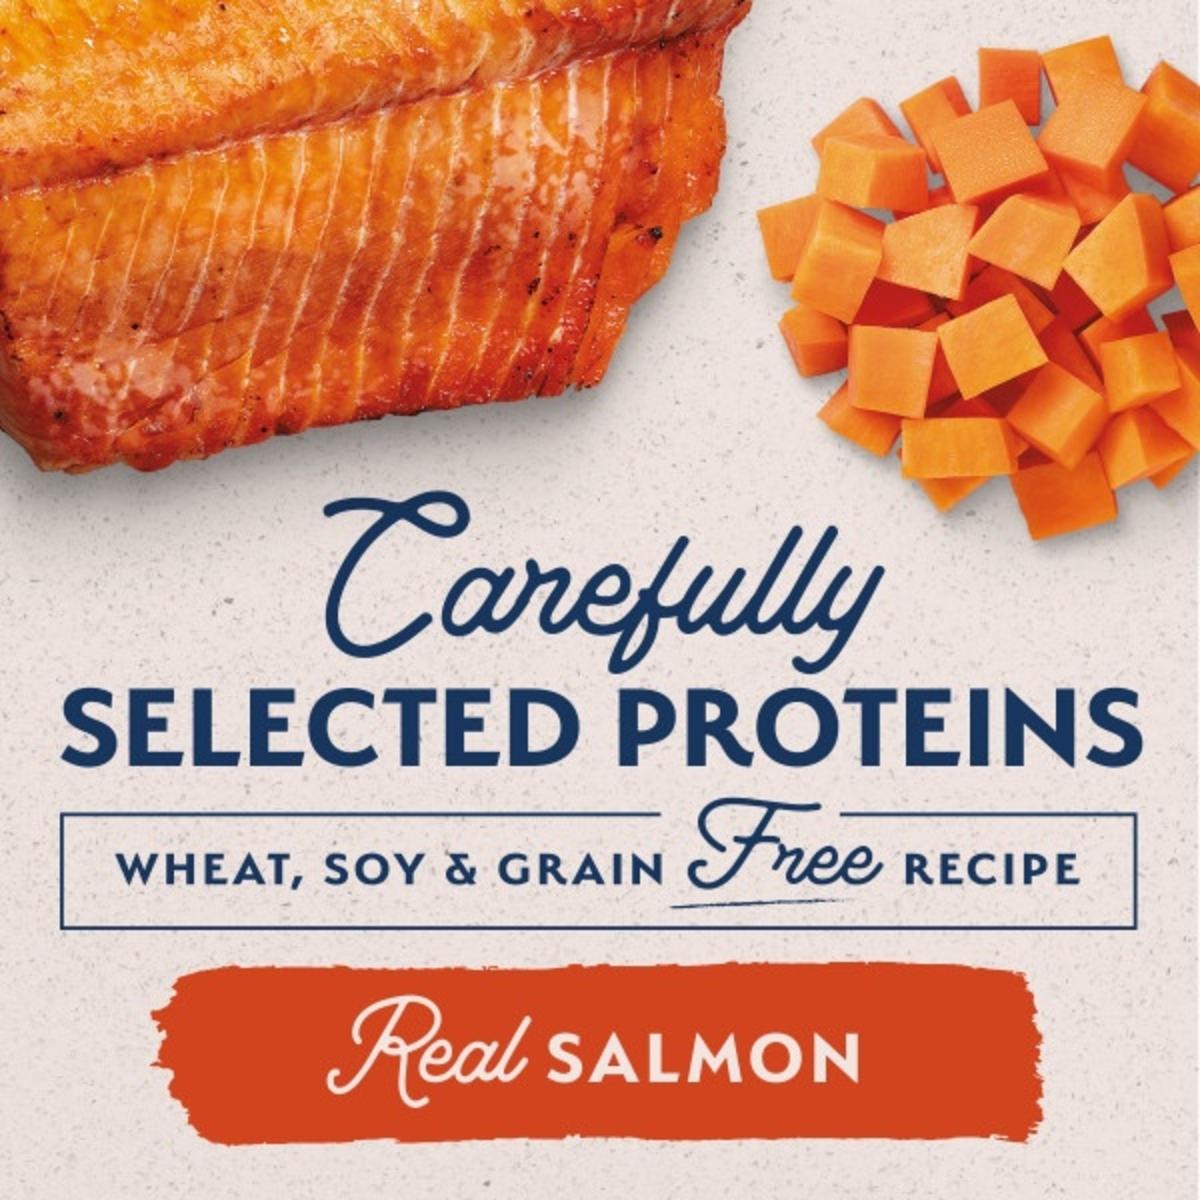 carefully selected proteins